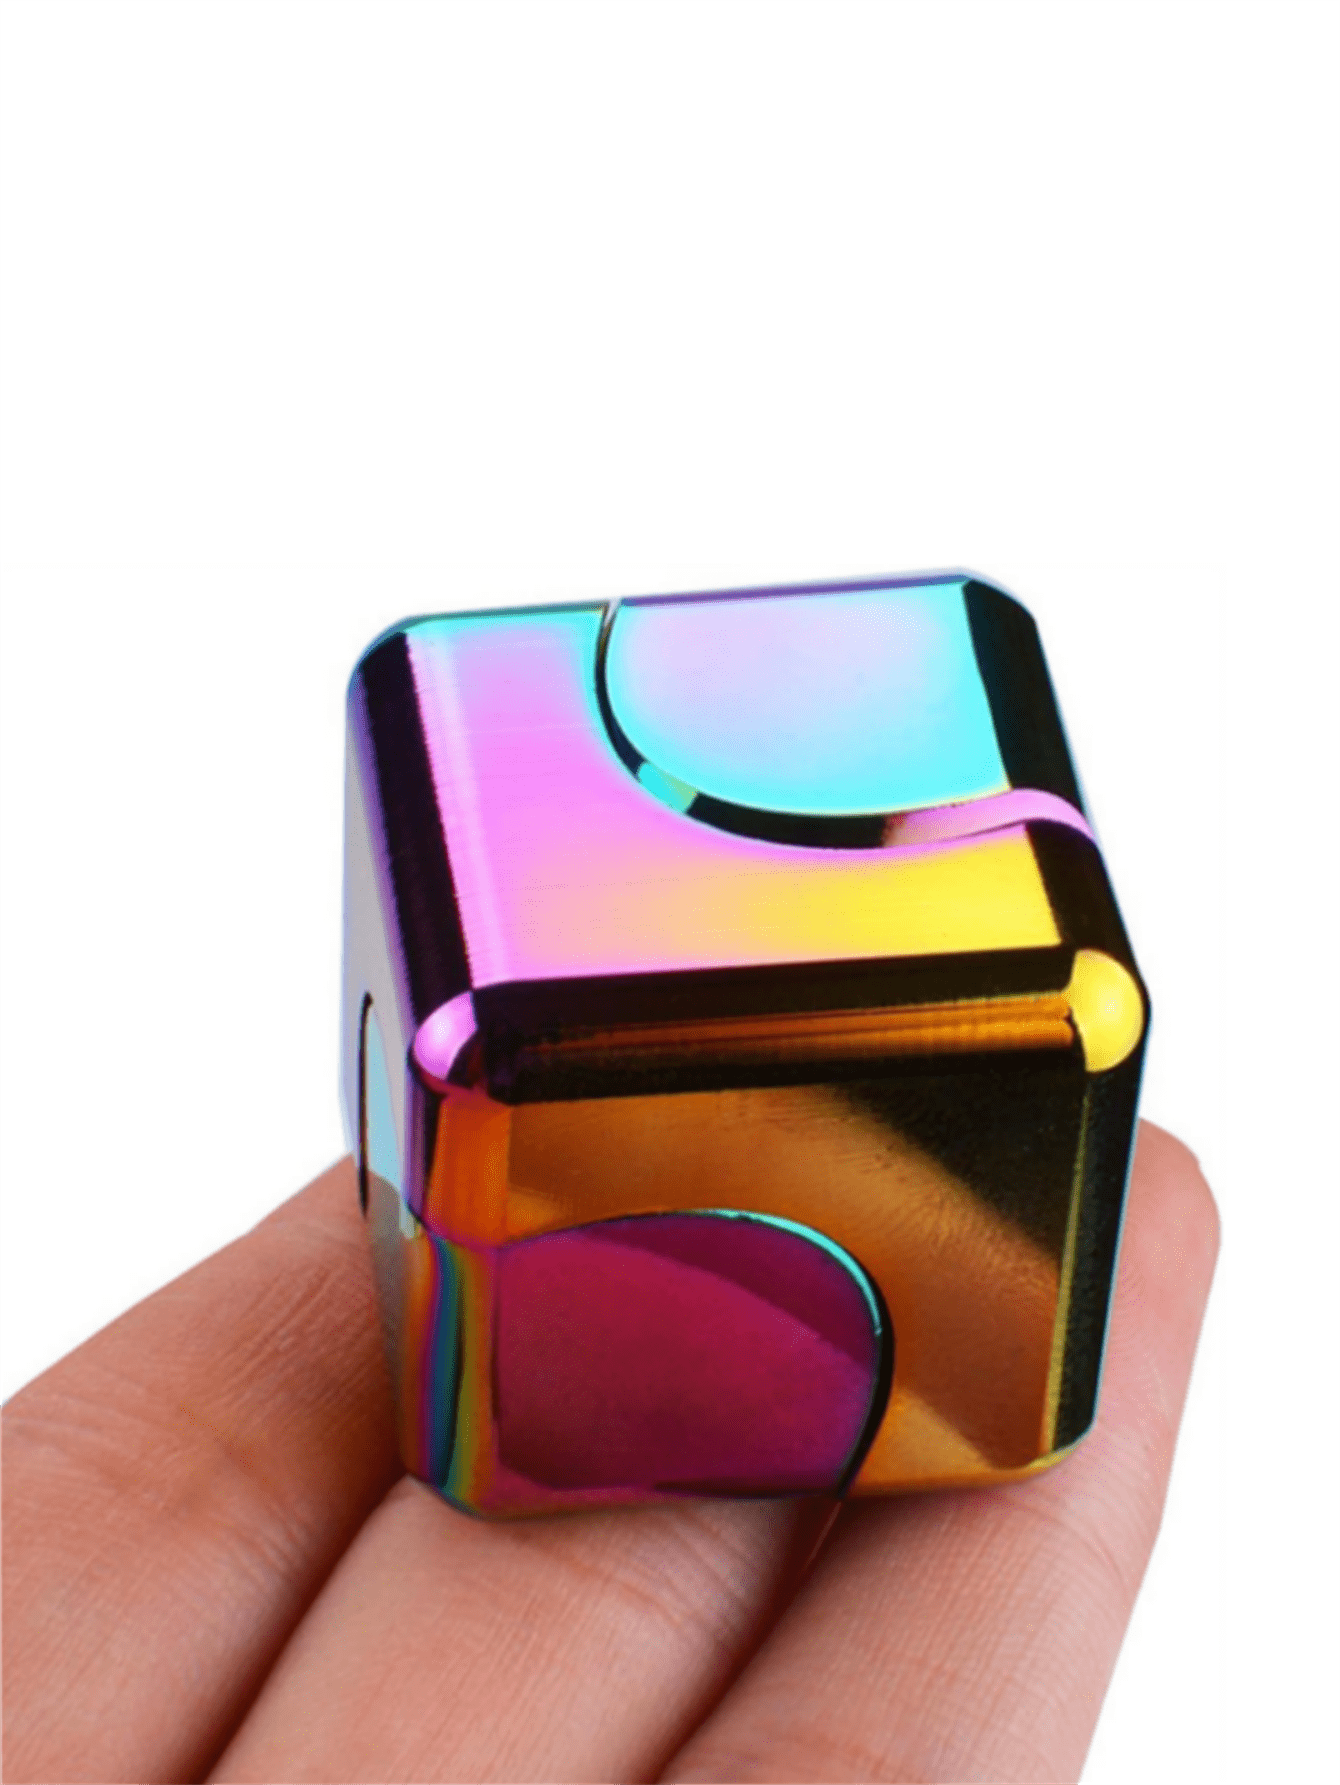 Toys Cube Adults, Metal EDC Figetsss Cool Desk Gadgets Office Toys Small Anxiety Figette Sensory Toy, ADHD Tools Fingears Figet Stress Relief Gift For Kid Girl Teens Men